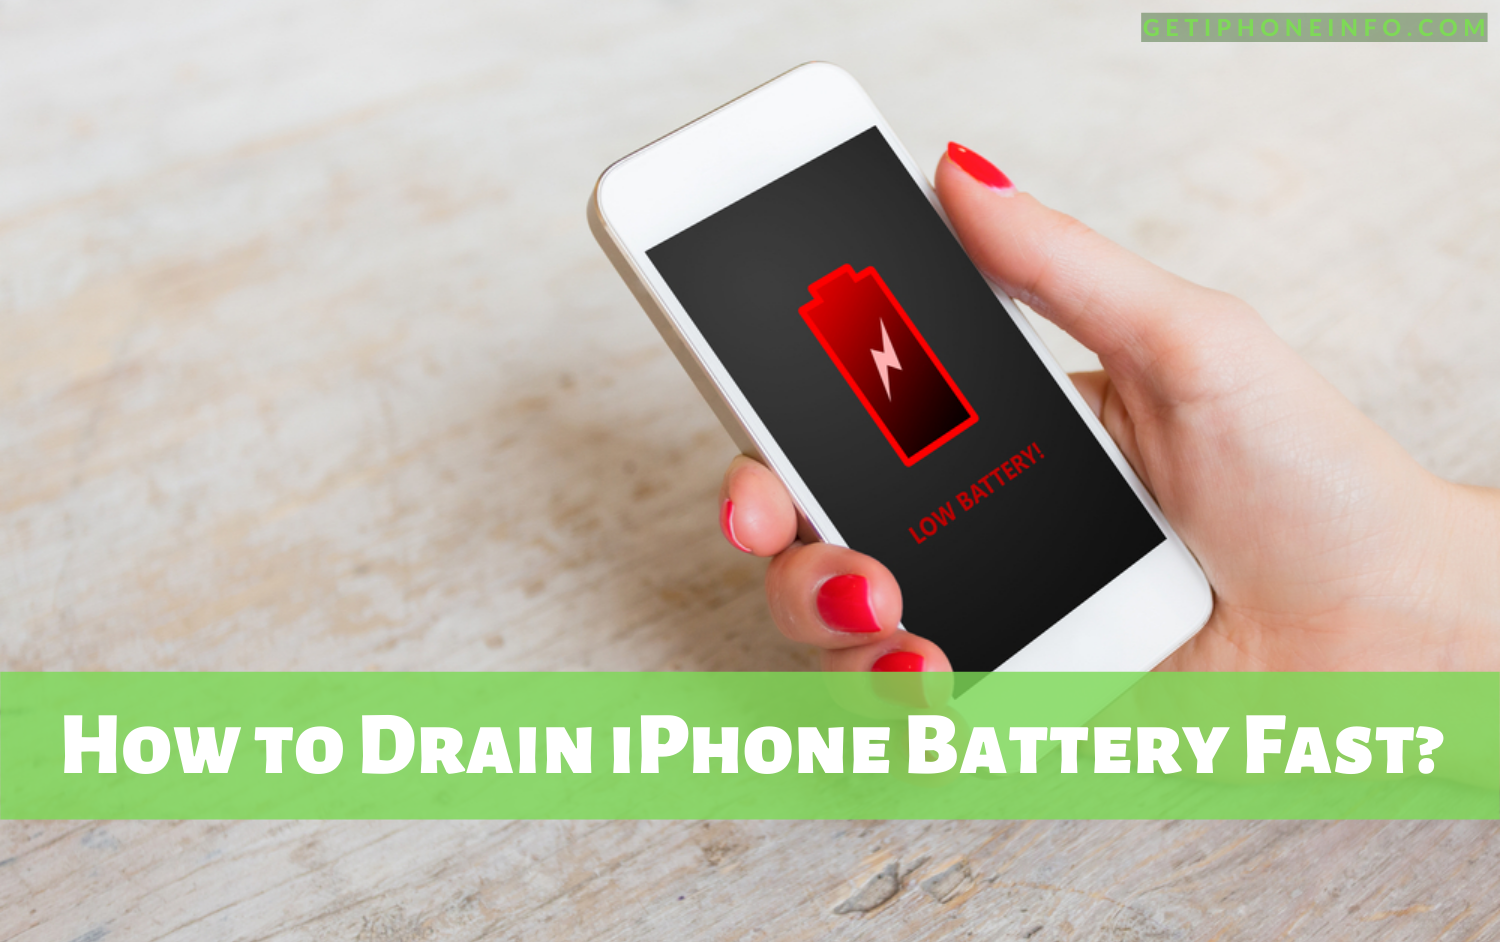 How Do I Drain My iPhone Battery Fast?